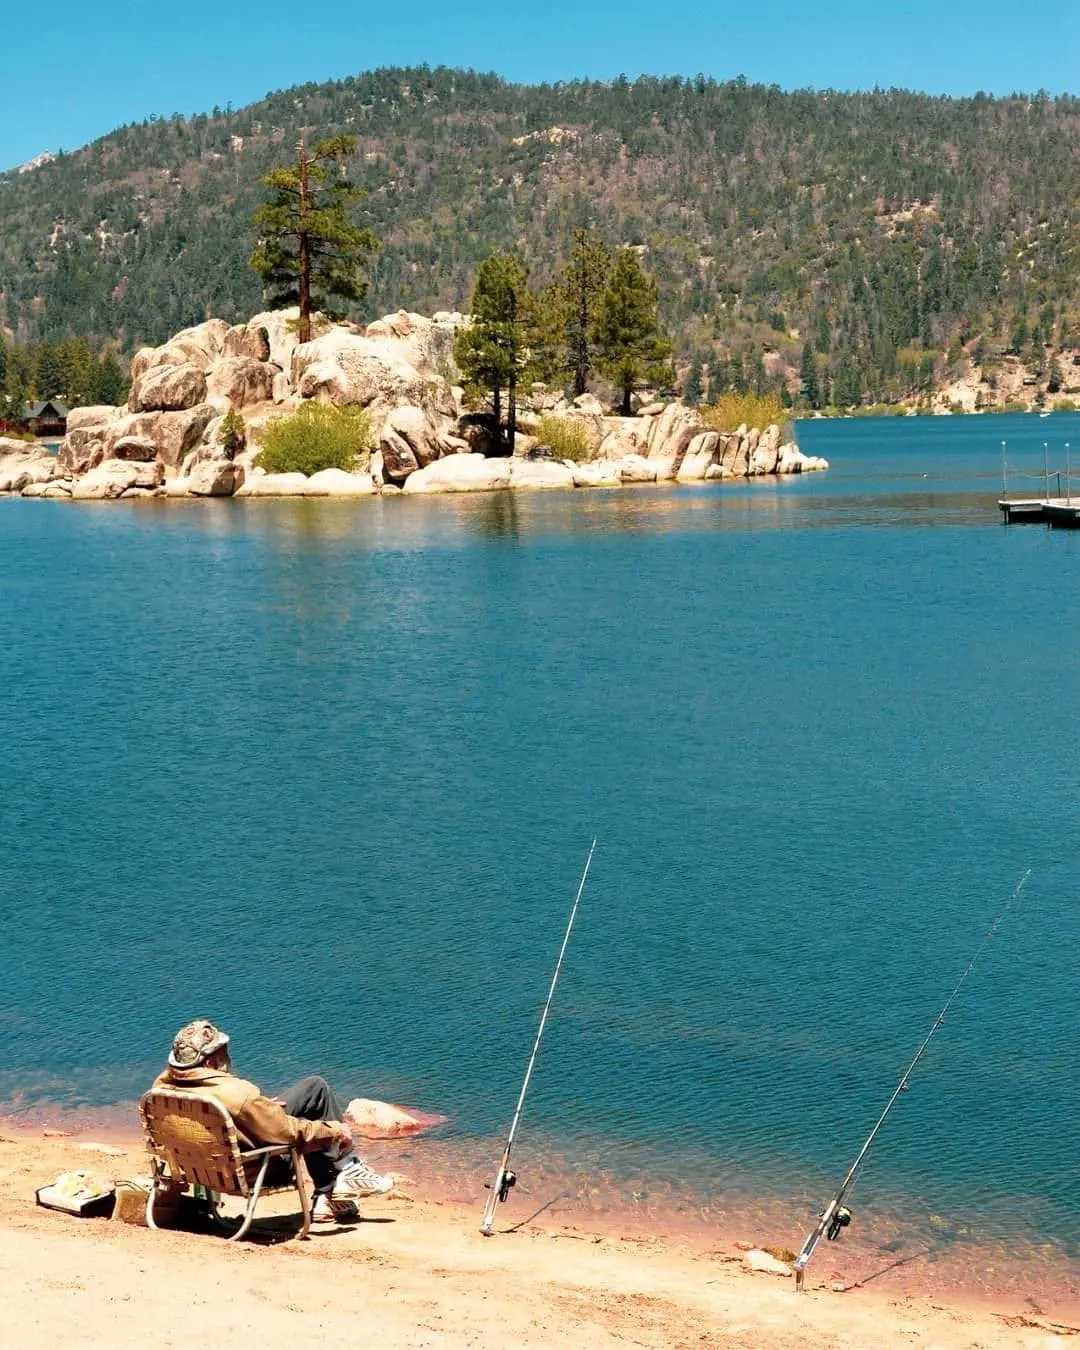 A man relaxes with is fishing rod in Big Bear Lake, California